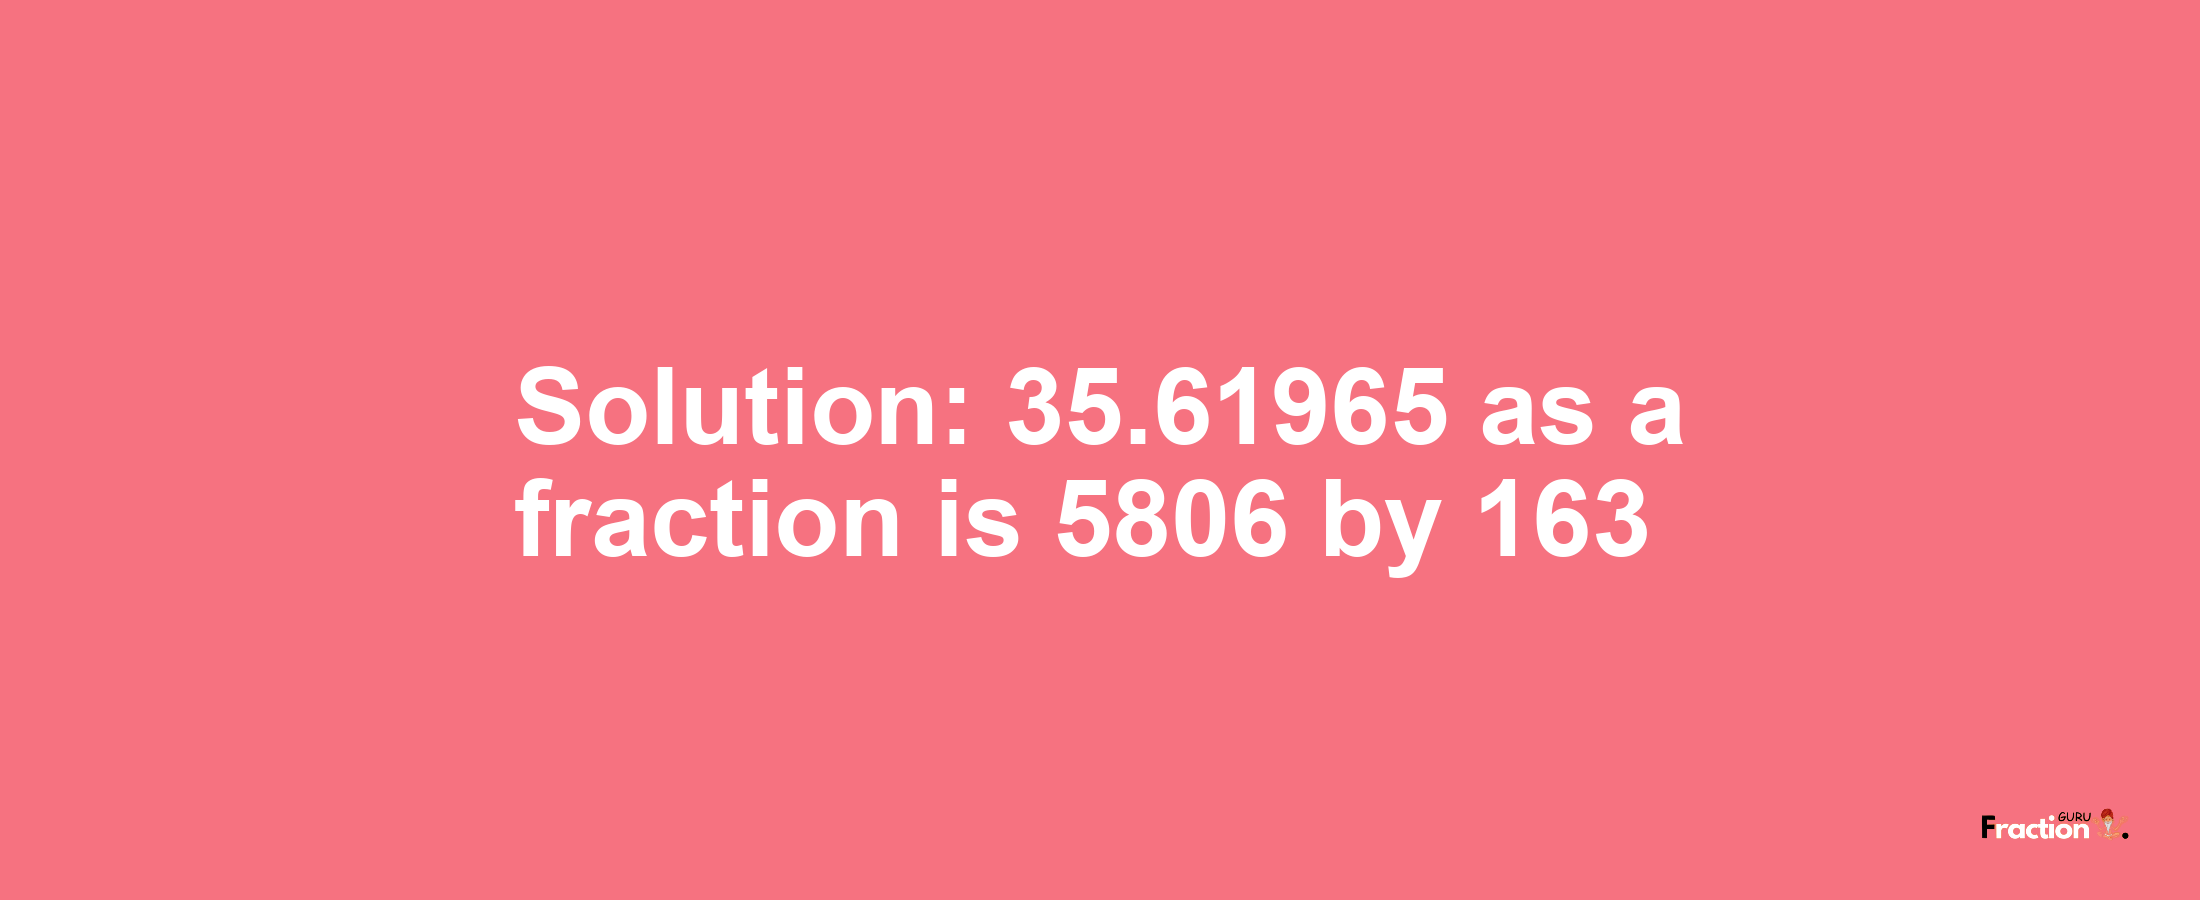 Solution:35.61965 as a fraction is 5806/163